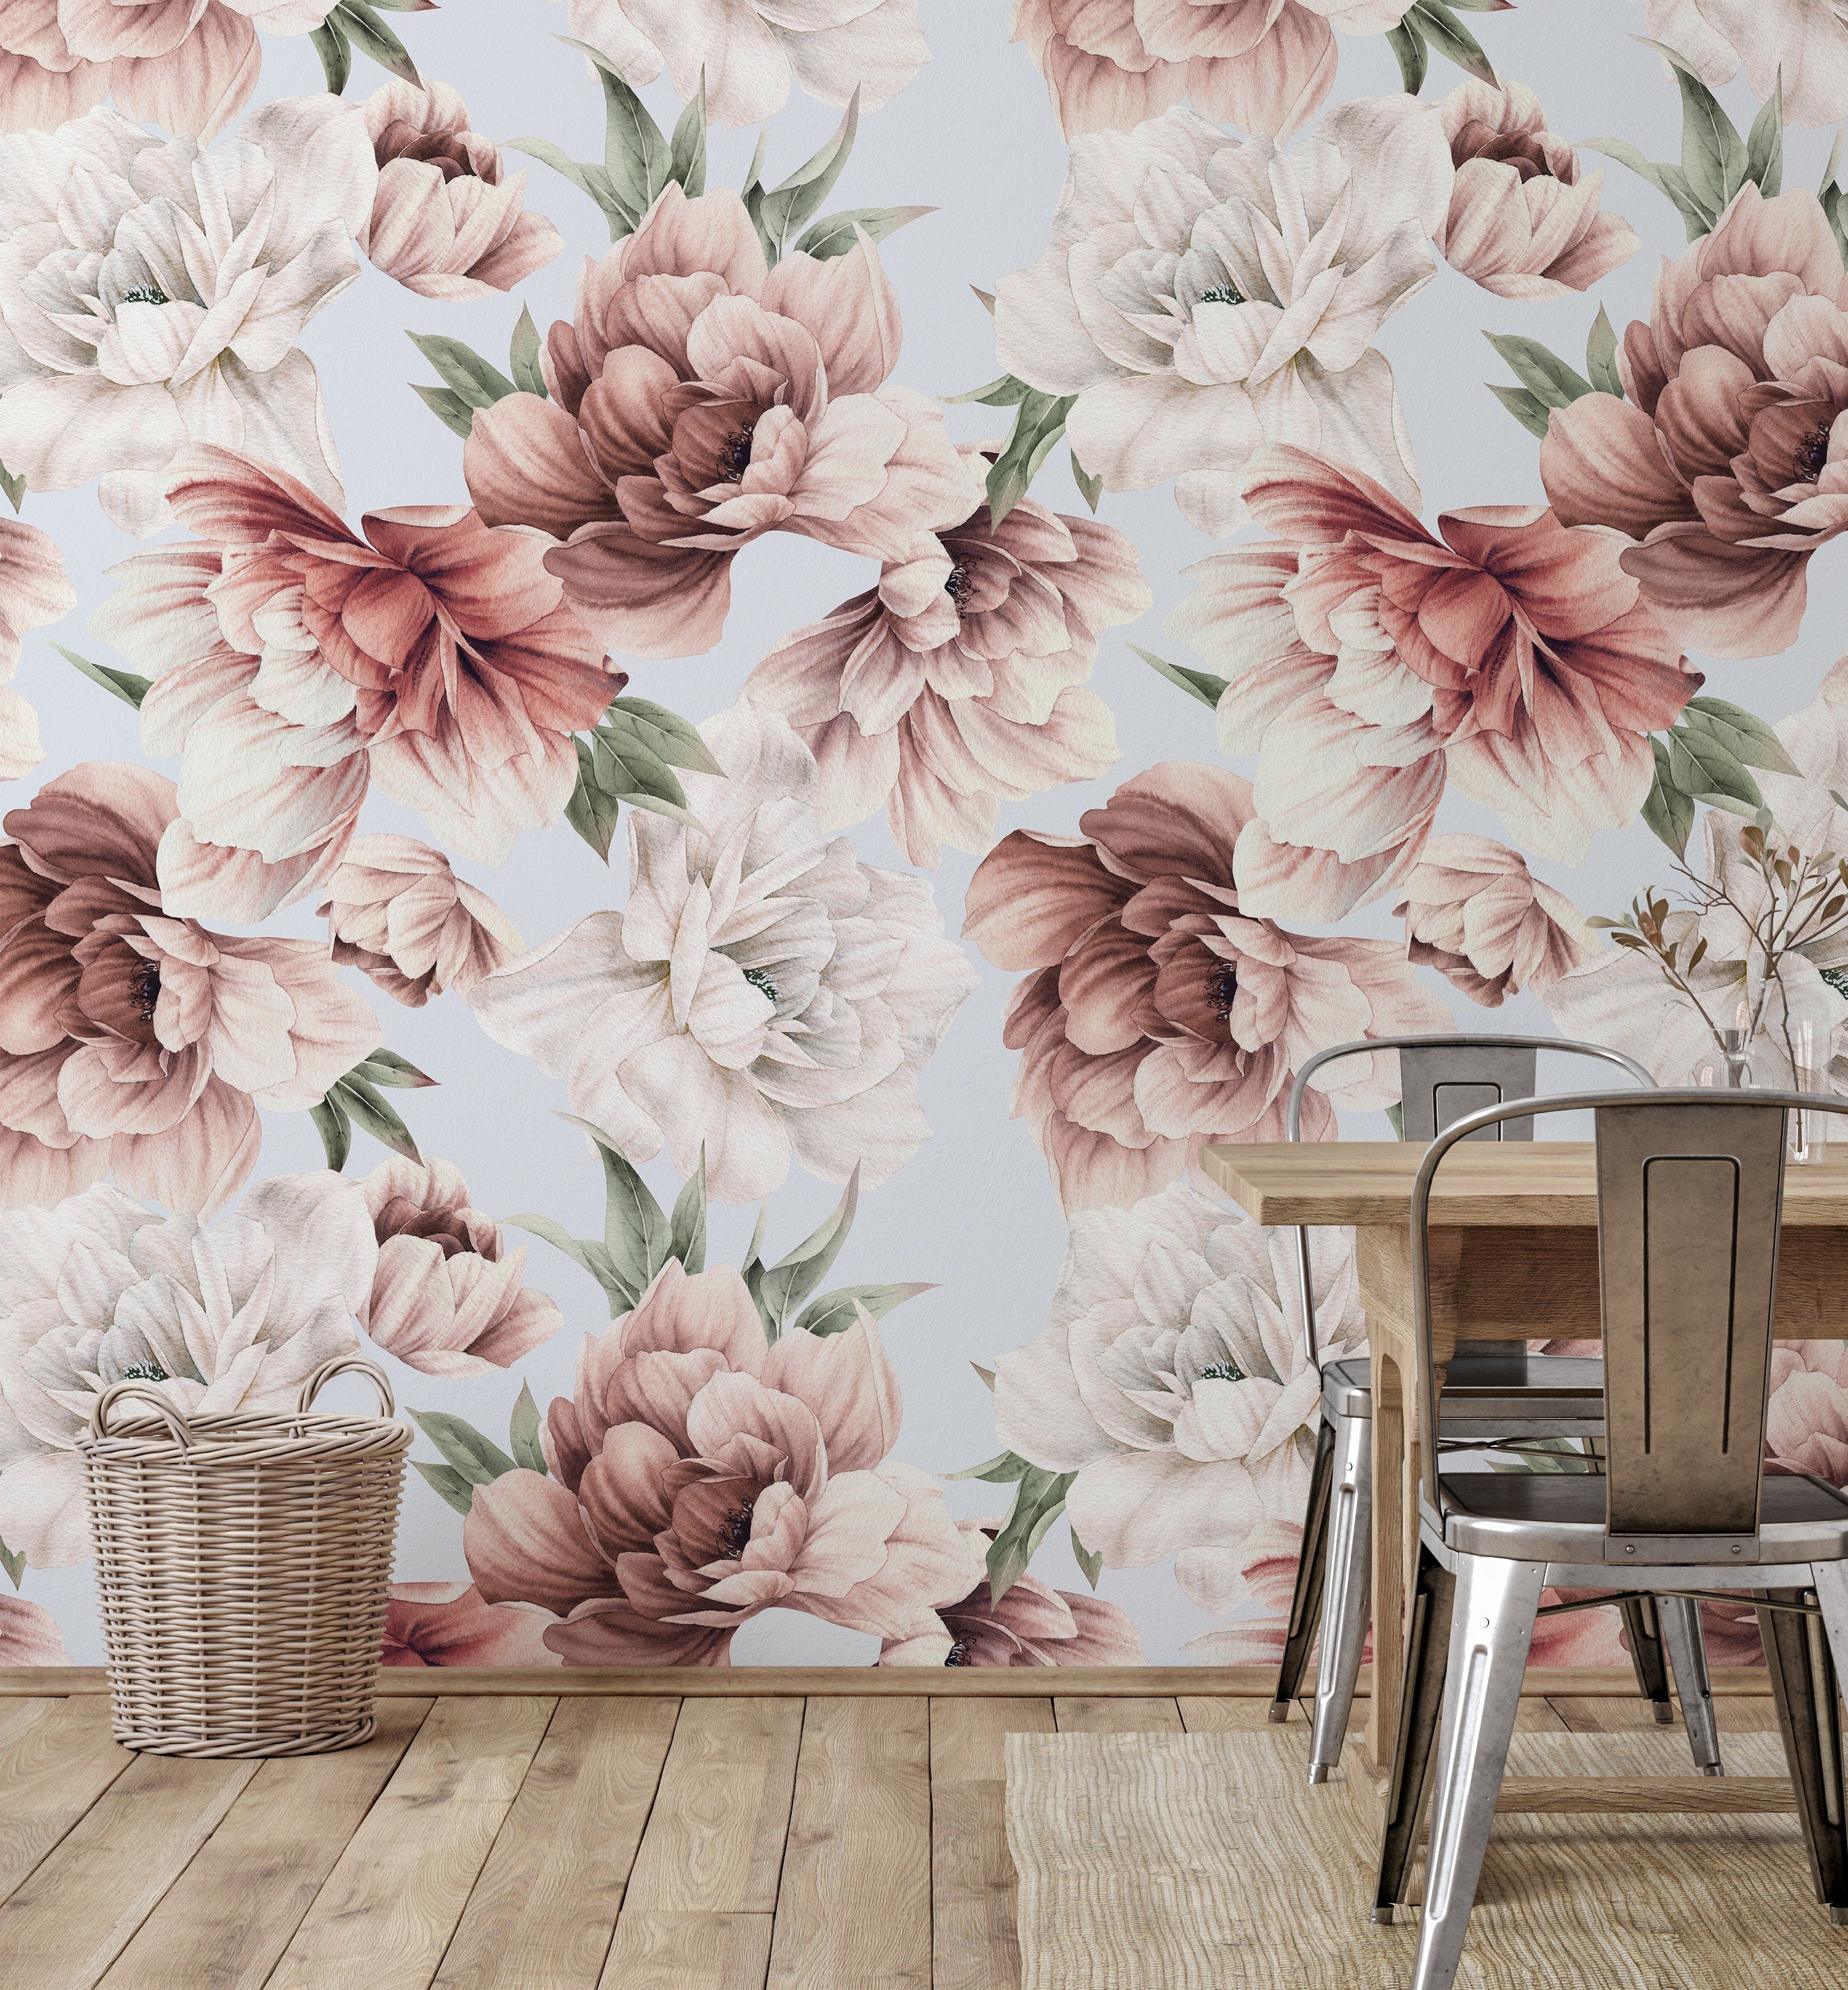 Large Floral Peony Wallpaper | Removable Wallpaper | Peel And Stick Wallpaper | Adhesive Wallpaper | Wall Paper Peel Stick Wall Mural 3670 - JamesAndColors